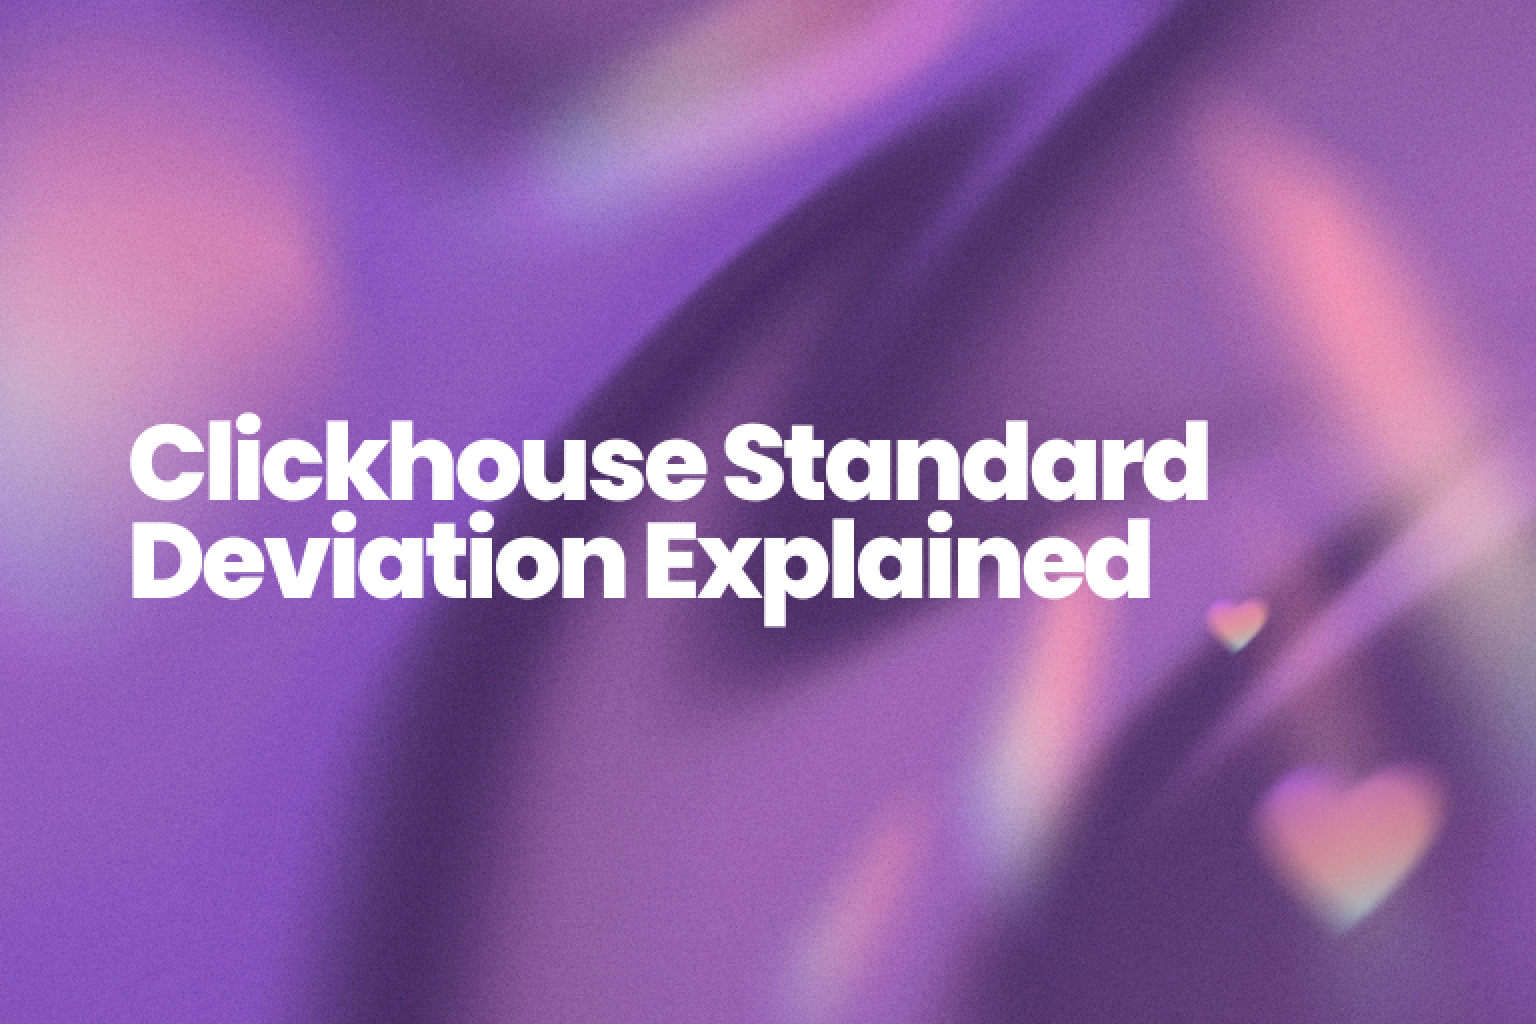 Unlock the power of ClickHouse for data analysis with this comprehensive guide on calculating standard deviation. Learn how RATH can enhance your data exploration efforts.